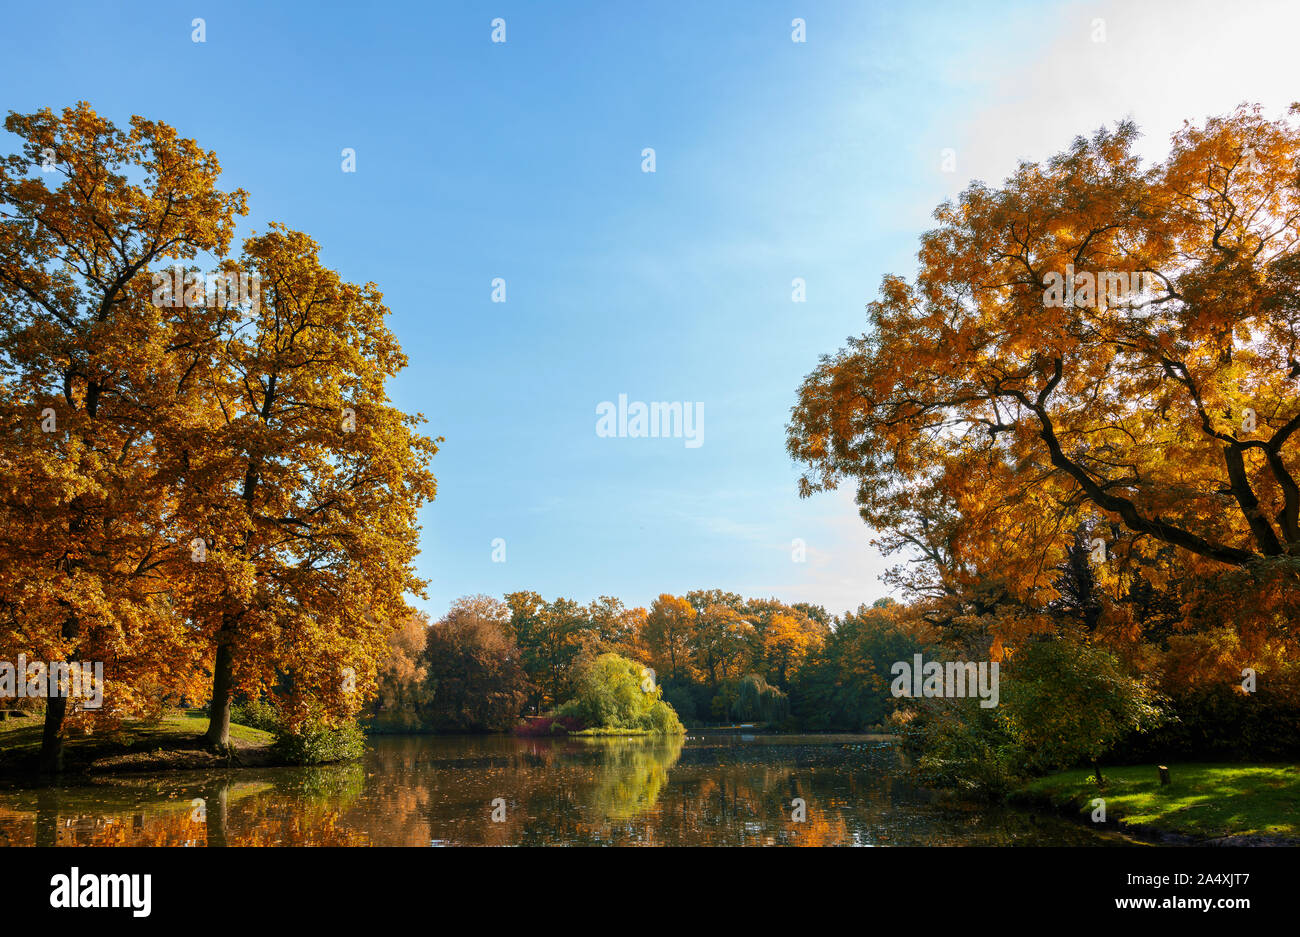 beautiful trees with colorful autumn leaves around a lake in an old park, seasonal landscape with copy space in the blue sky Stock Photo